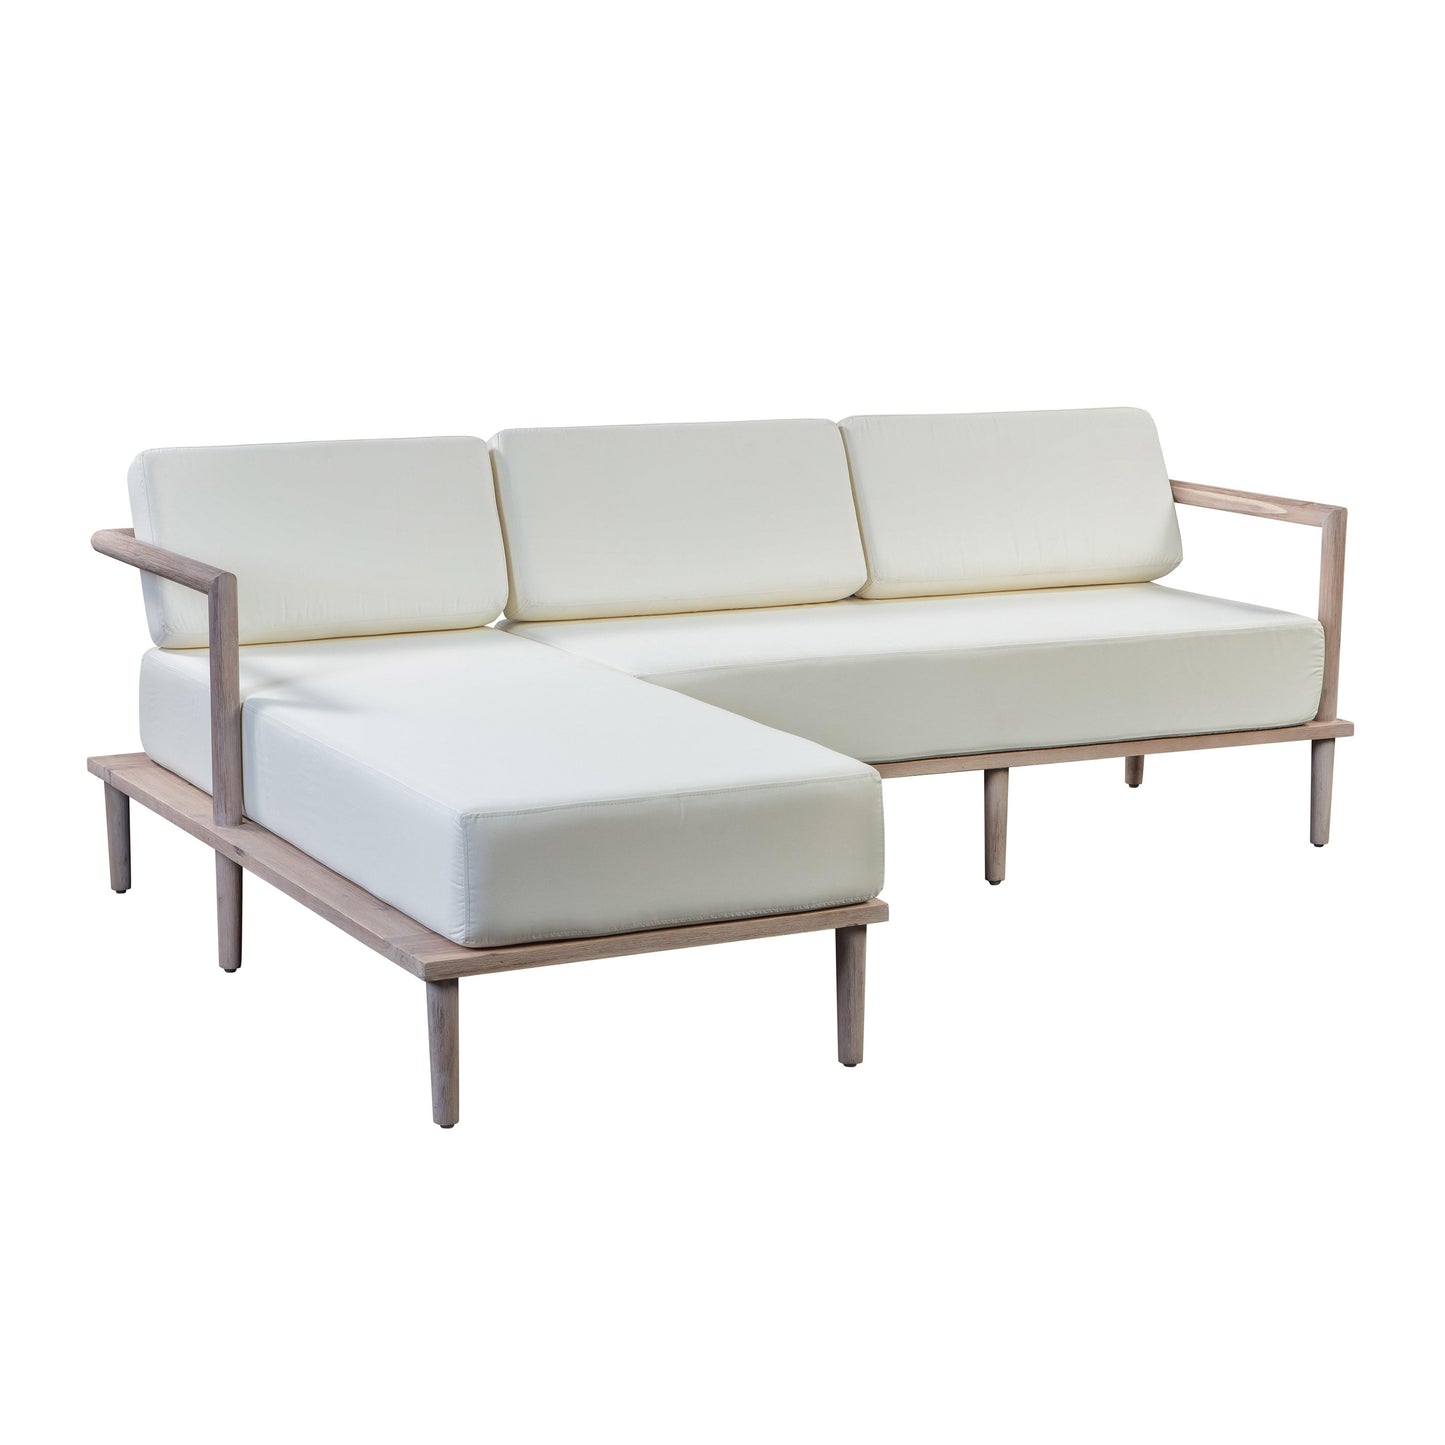 Tov Furniture Emerson Cream Outdoor Sectional LAF